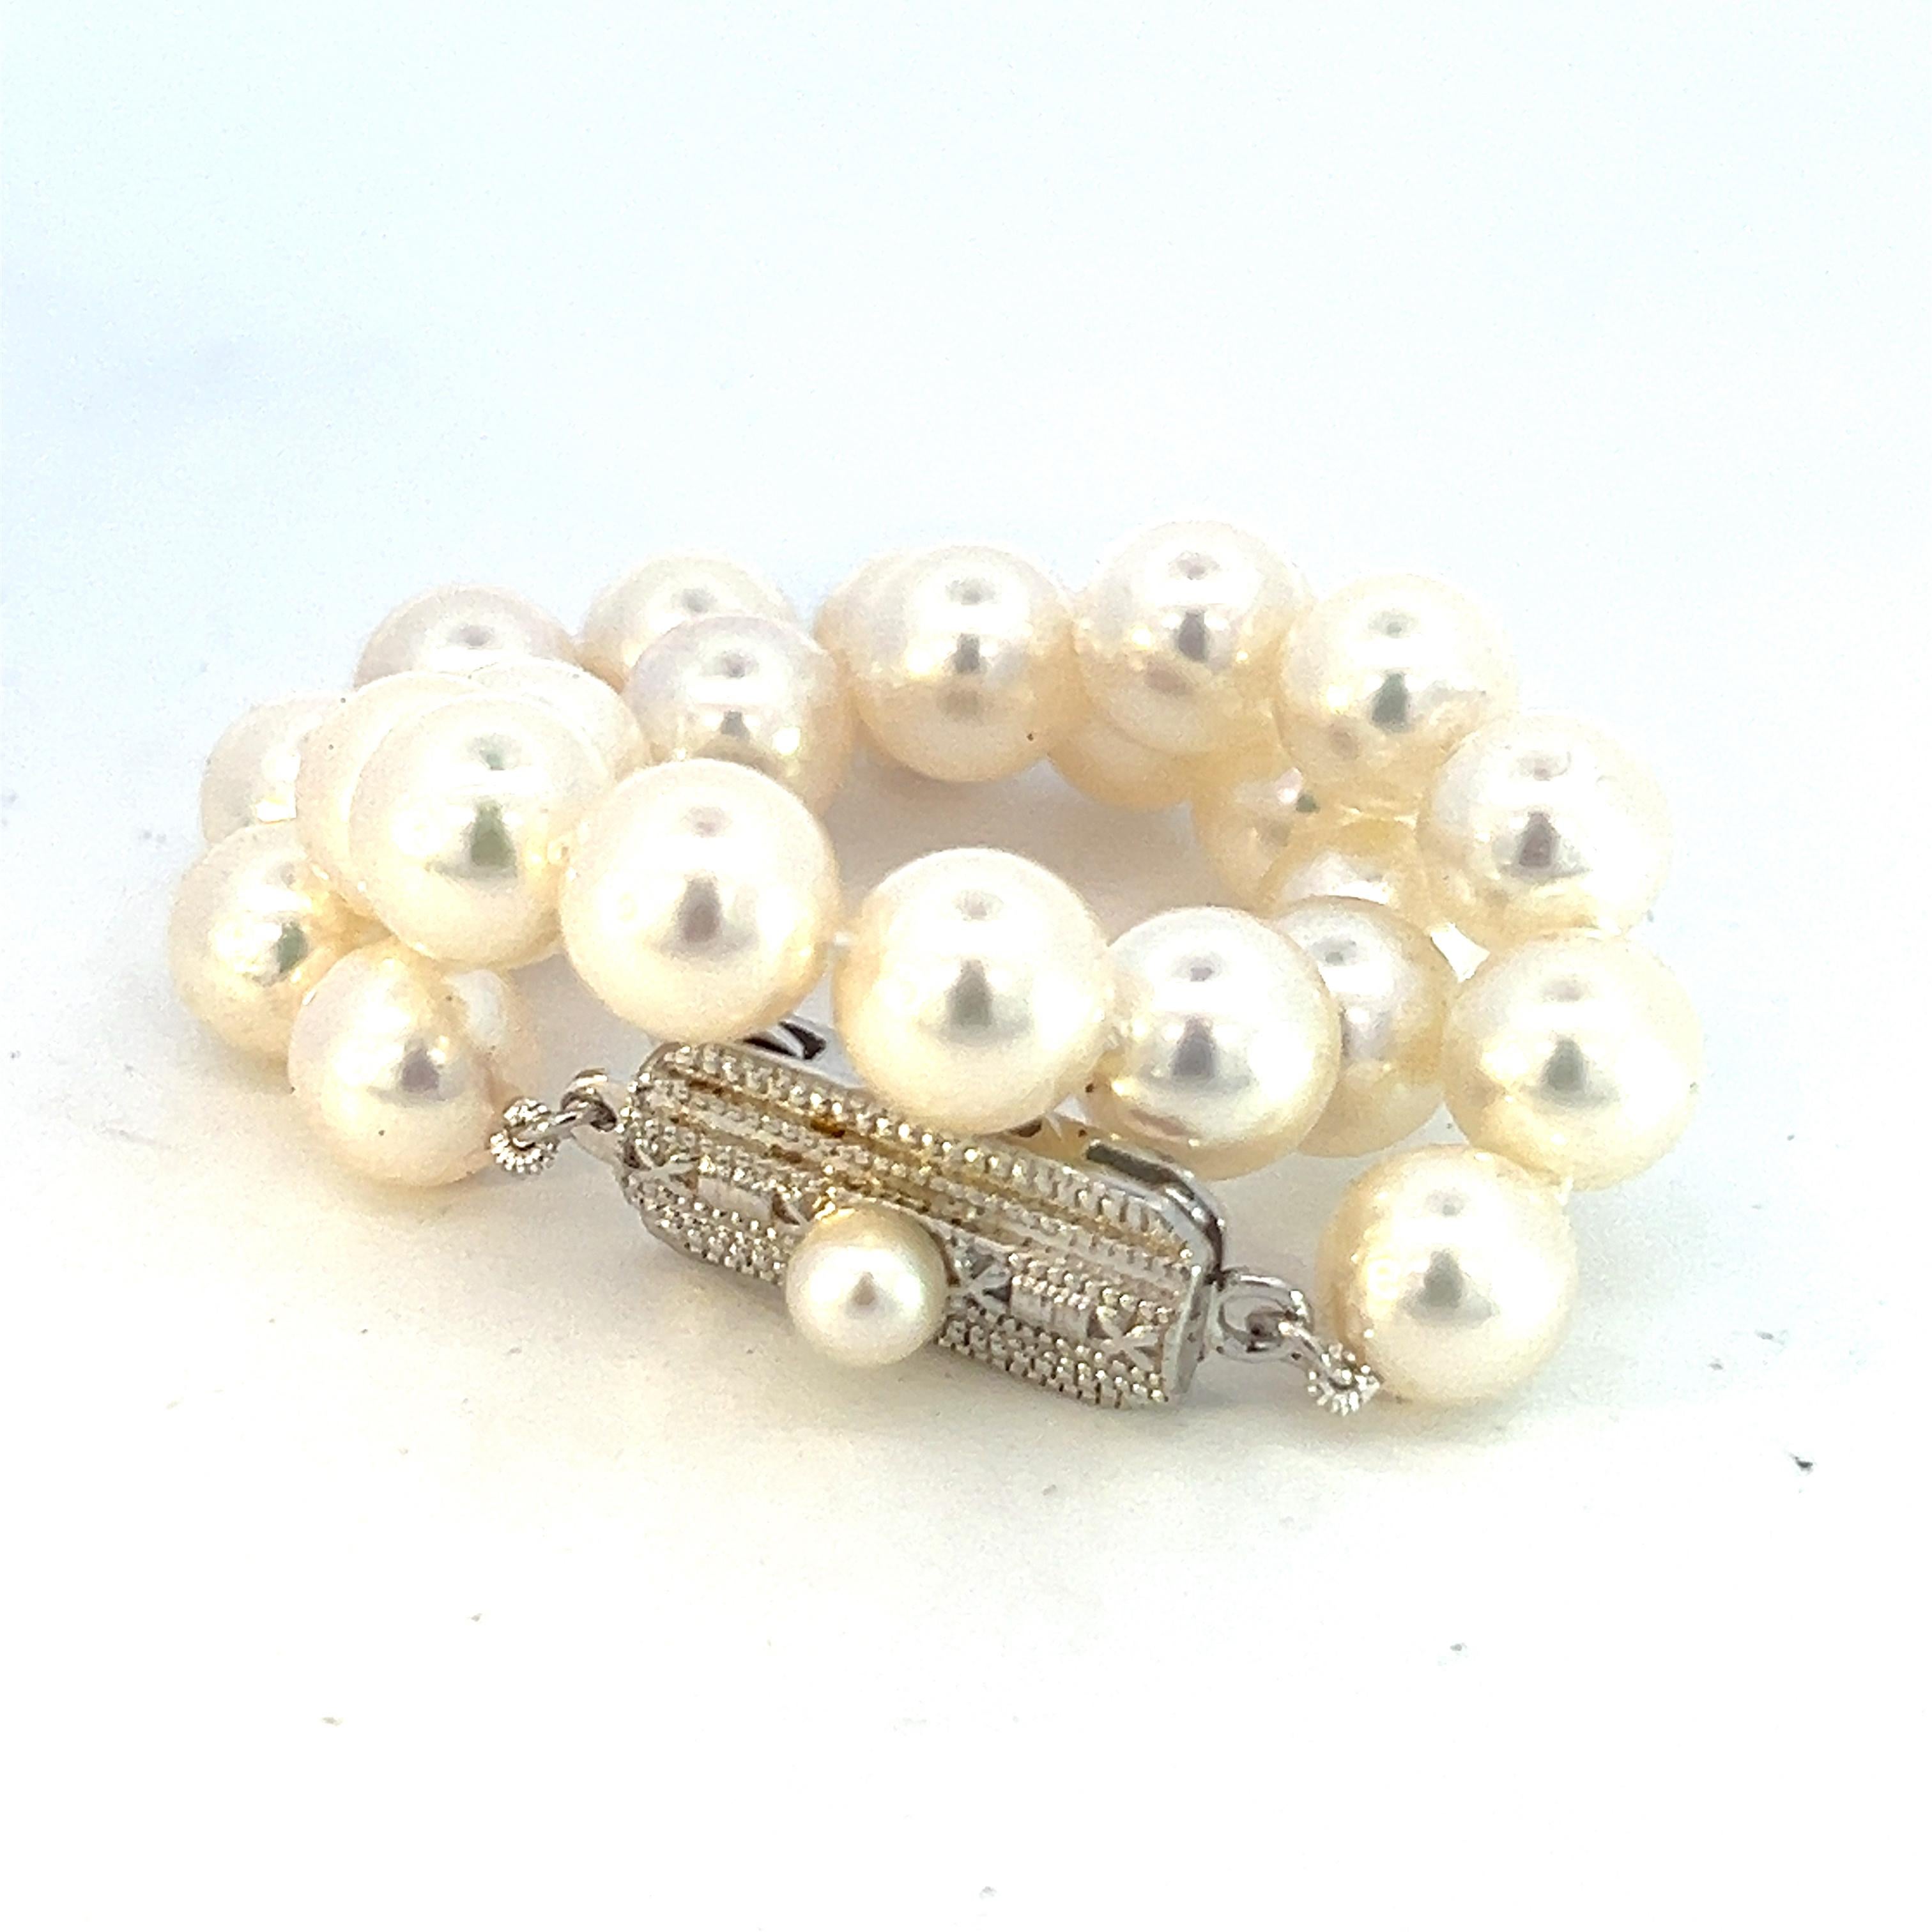 Authentic Mikimoto Estate Akoya Pearl Bracelet 7.25 Silver 6.5 - 7 mm M355

Please look at the video attached for this item. With the video, you can see the movement of the item and appreciate the faceting and details better.

This elegant Authentic